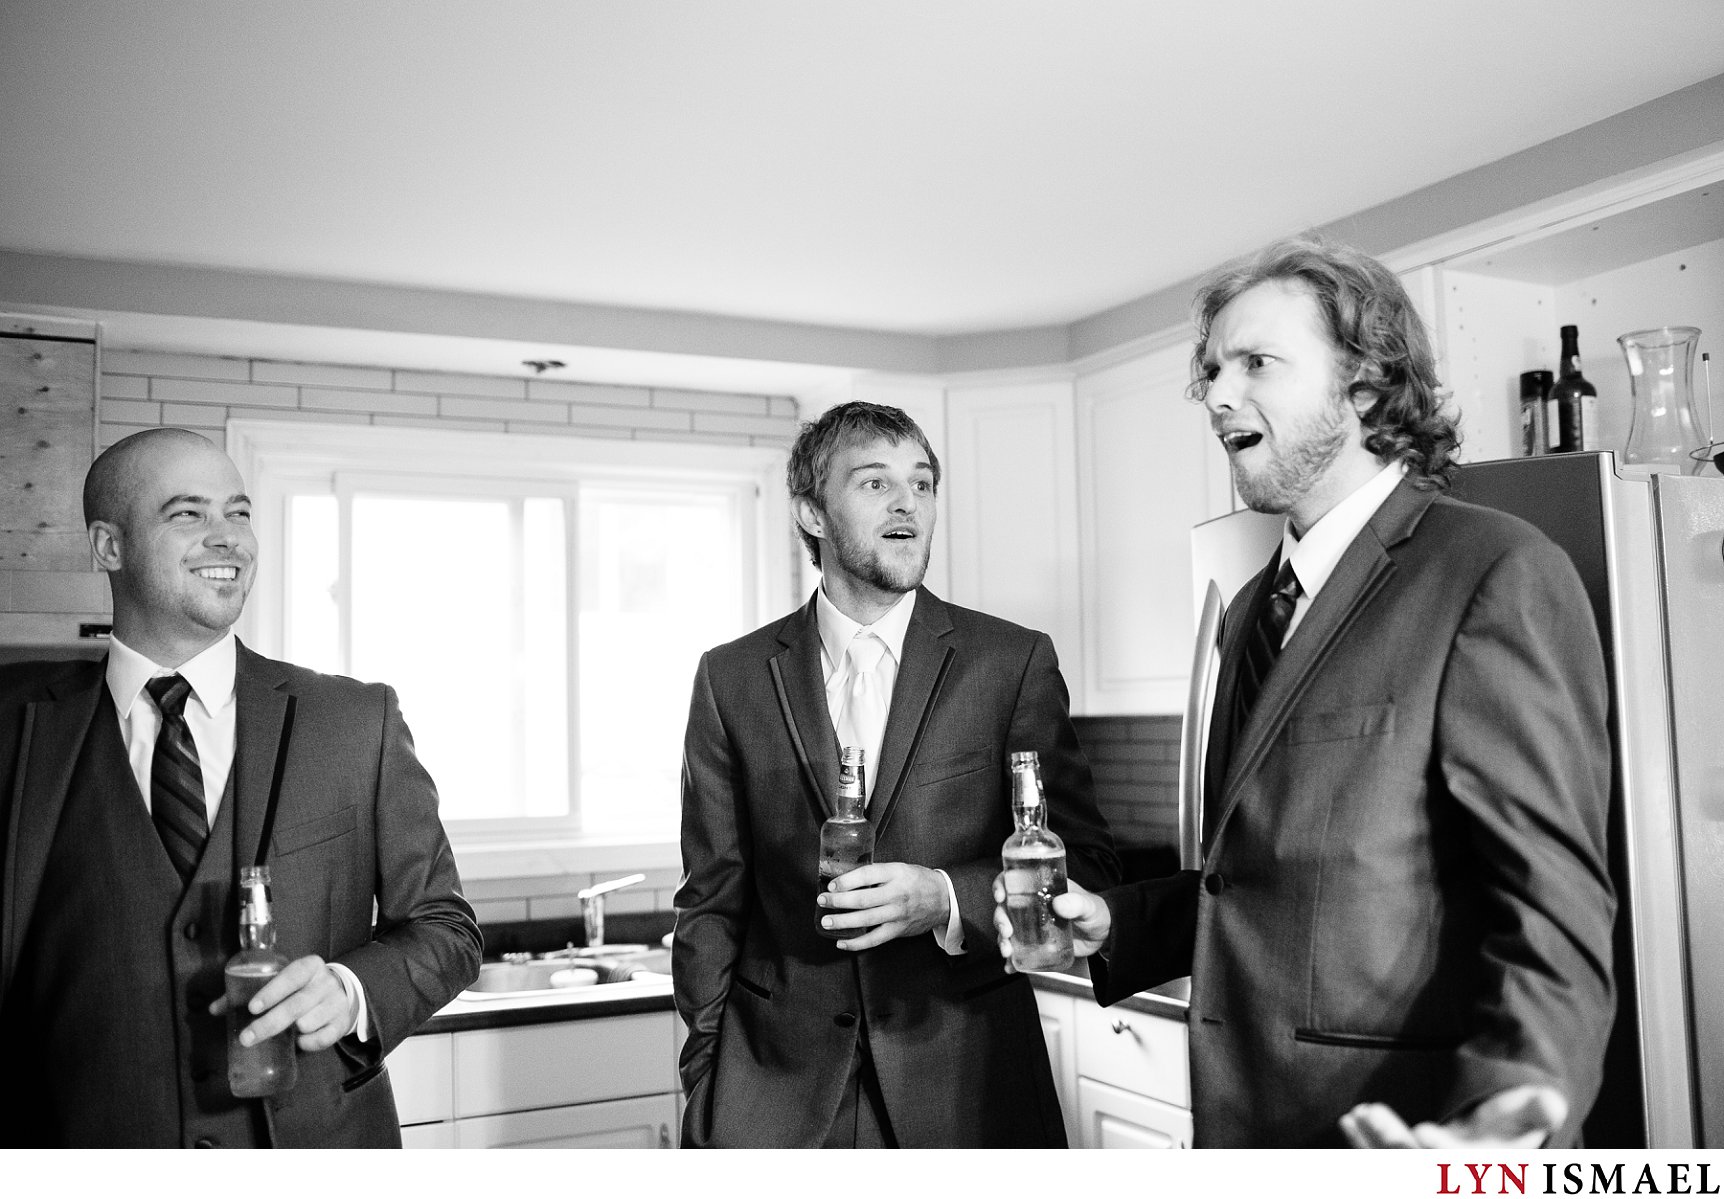 A funny moment when the best man tells a story about the groom.